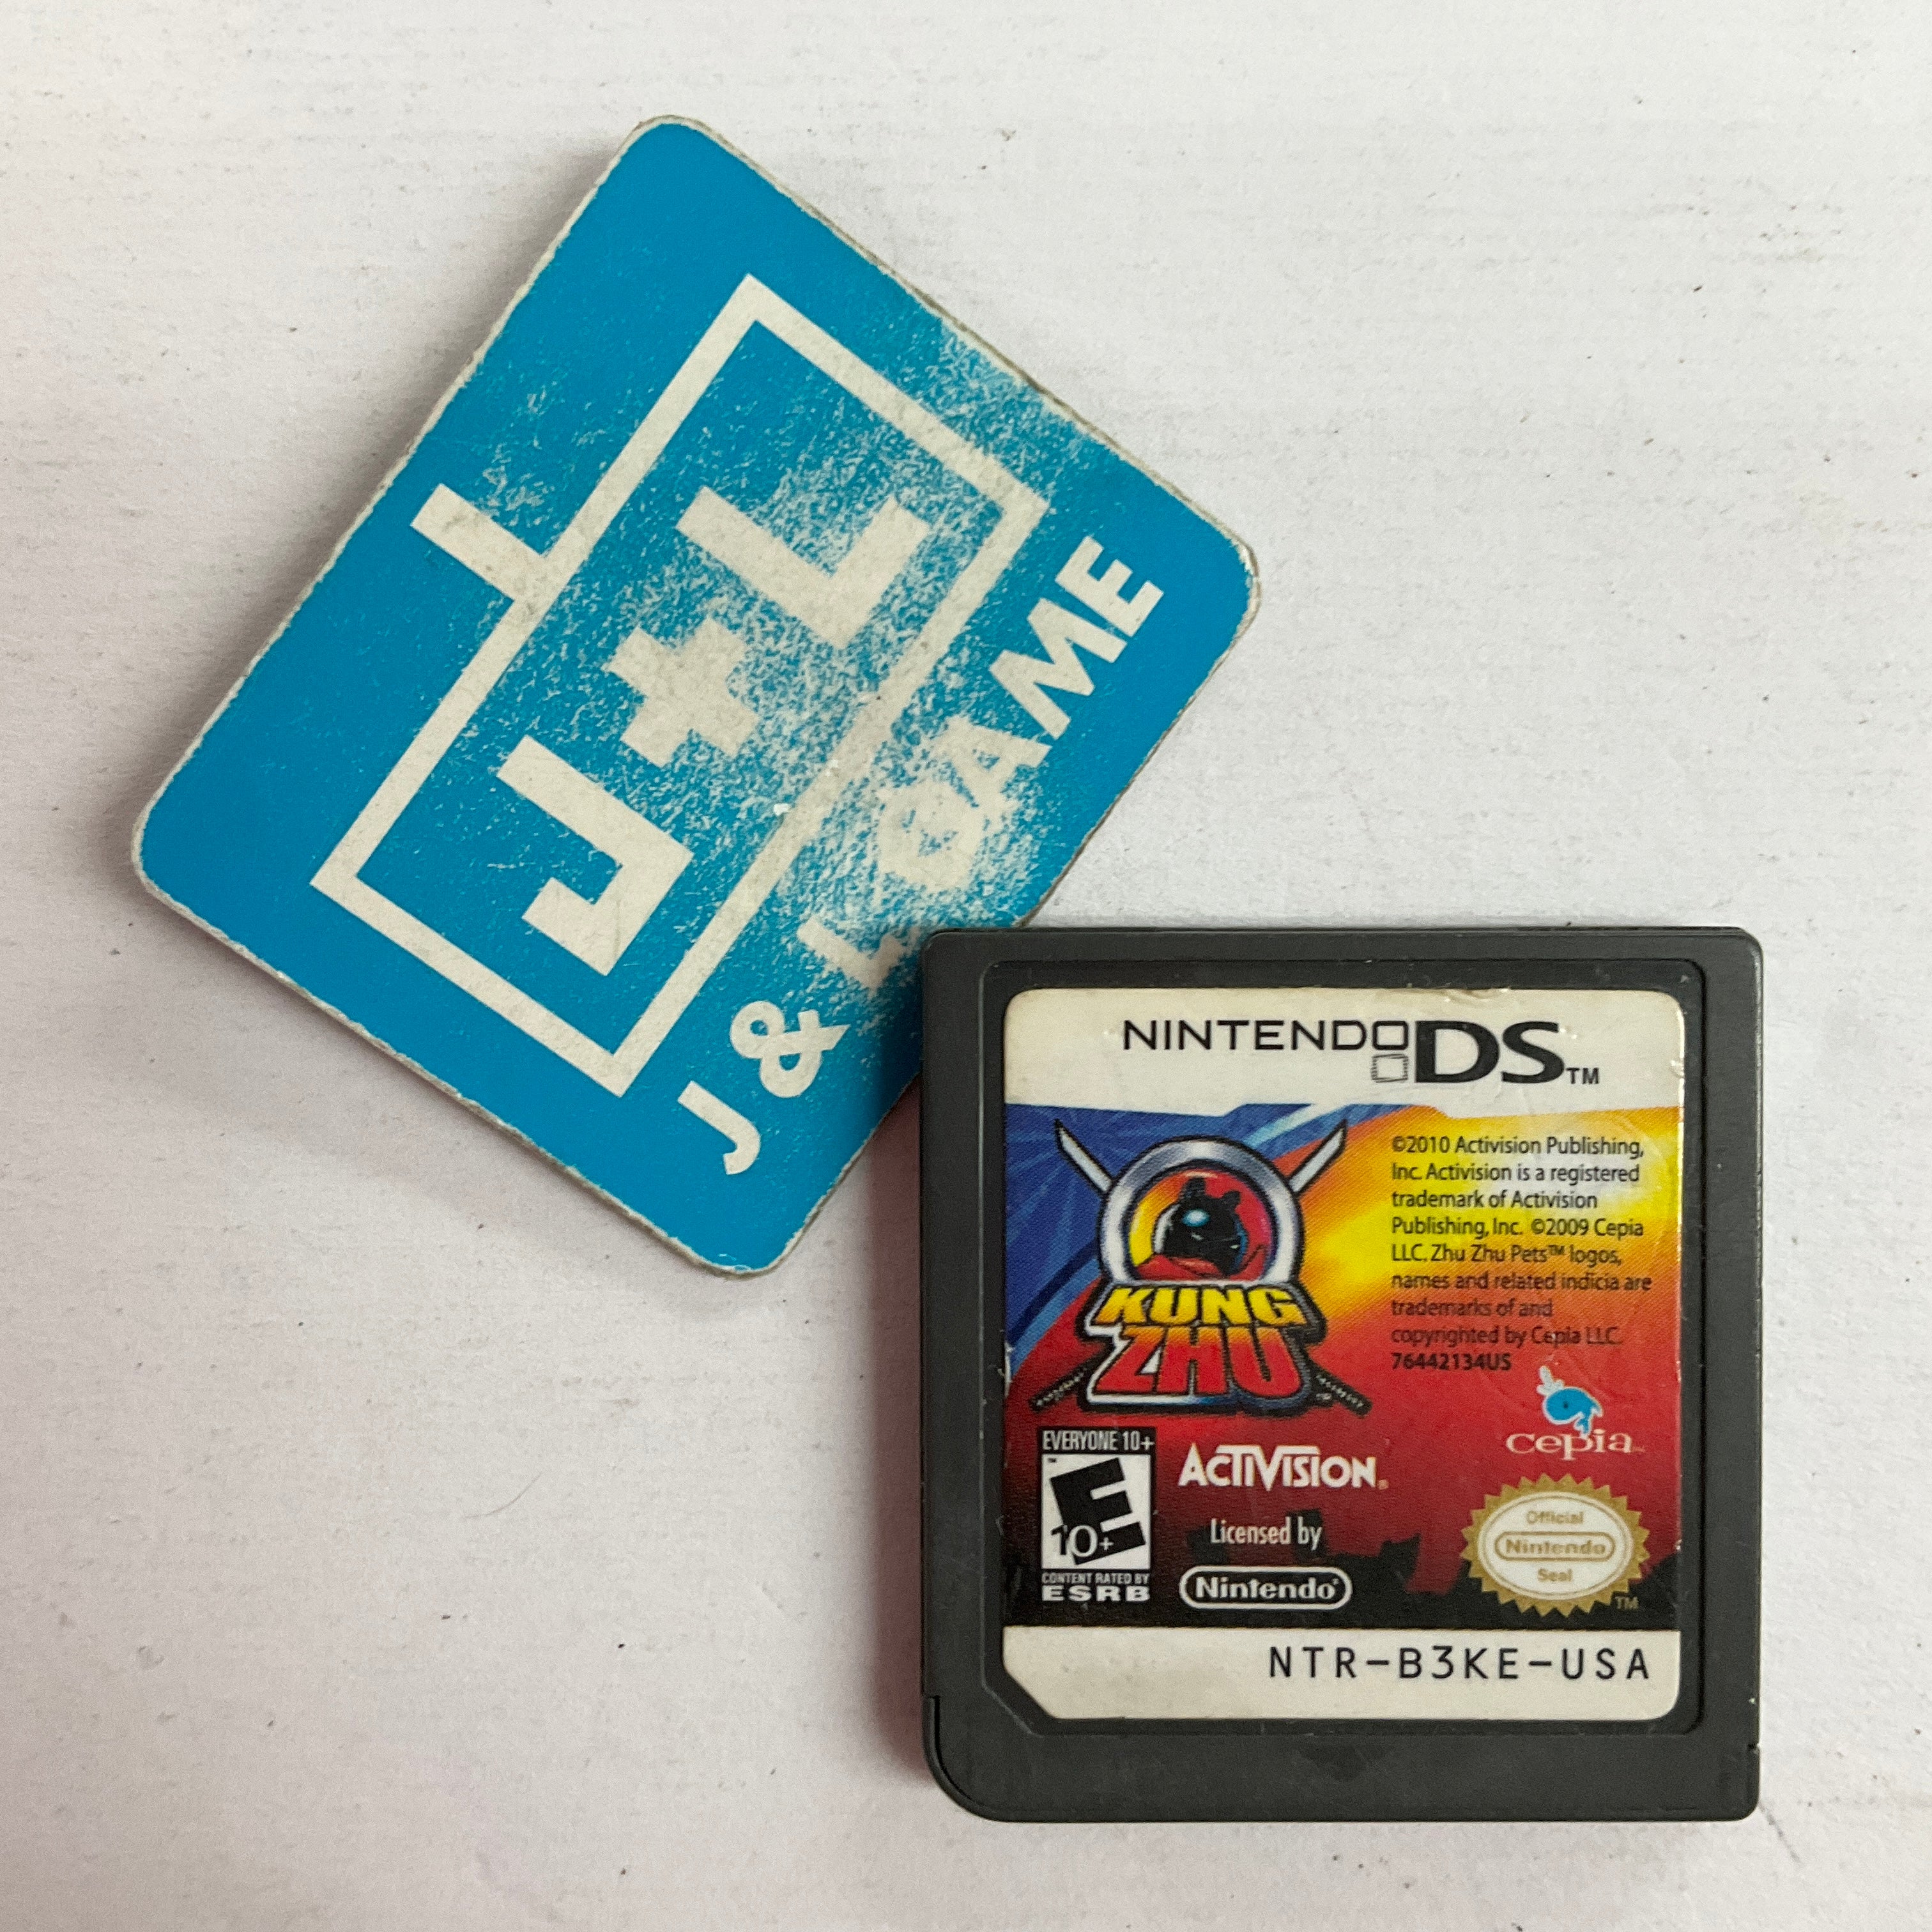 Kung Zhu - (NDS) Nintendo DS [Pre-Owned] Video Games Activision   